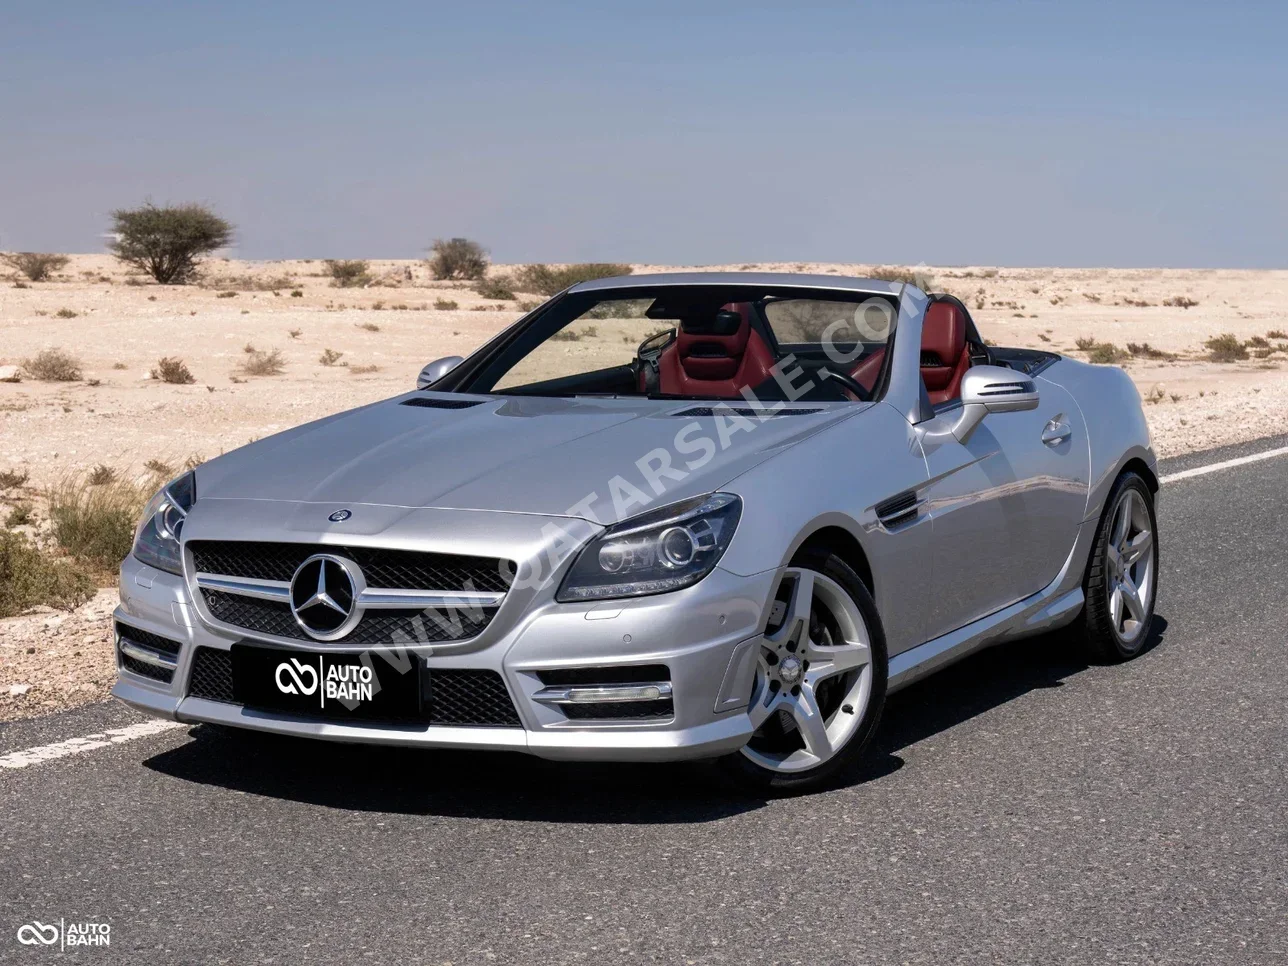 Mercedes-Benz  SLK  200  2013  Automatic  76,000 Km  4 Cylinder  Rear Wheel Drive (RWD)  Convertible  Silver